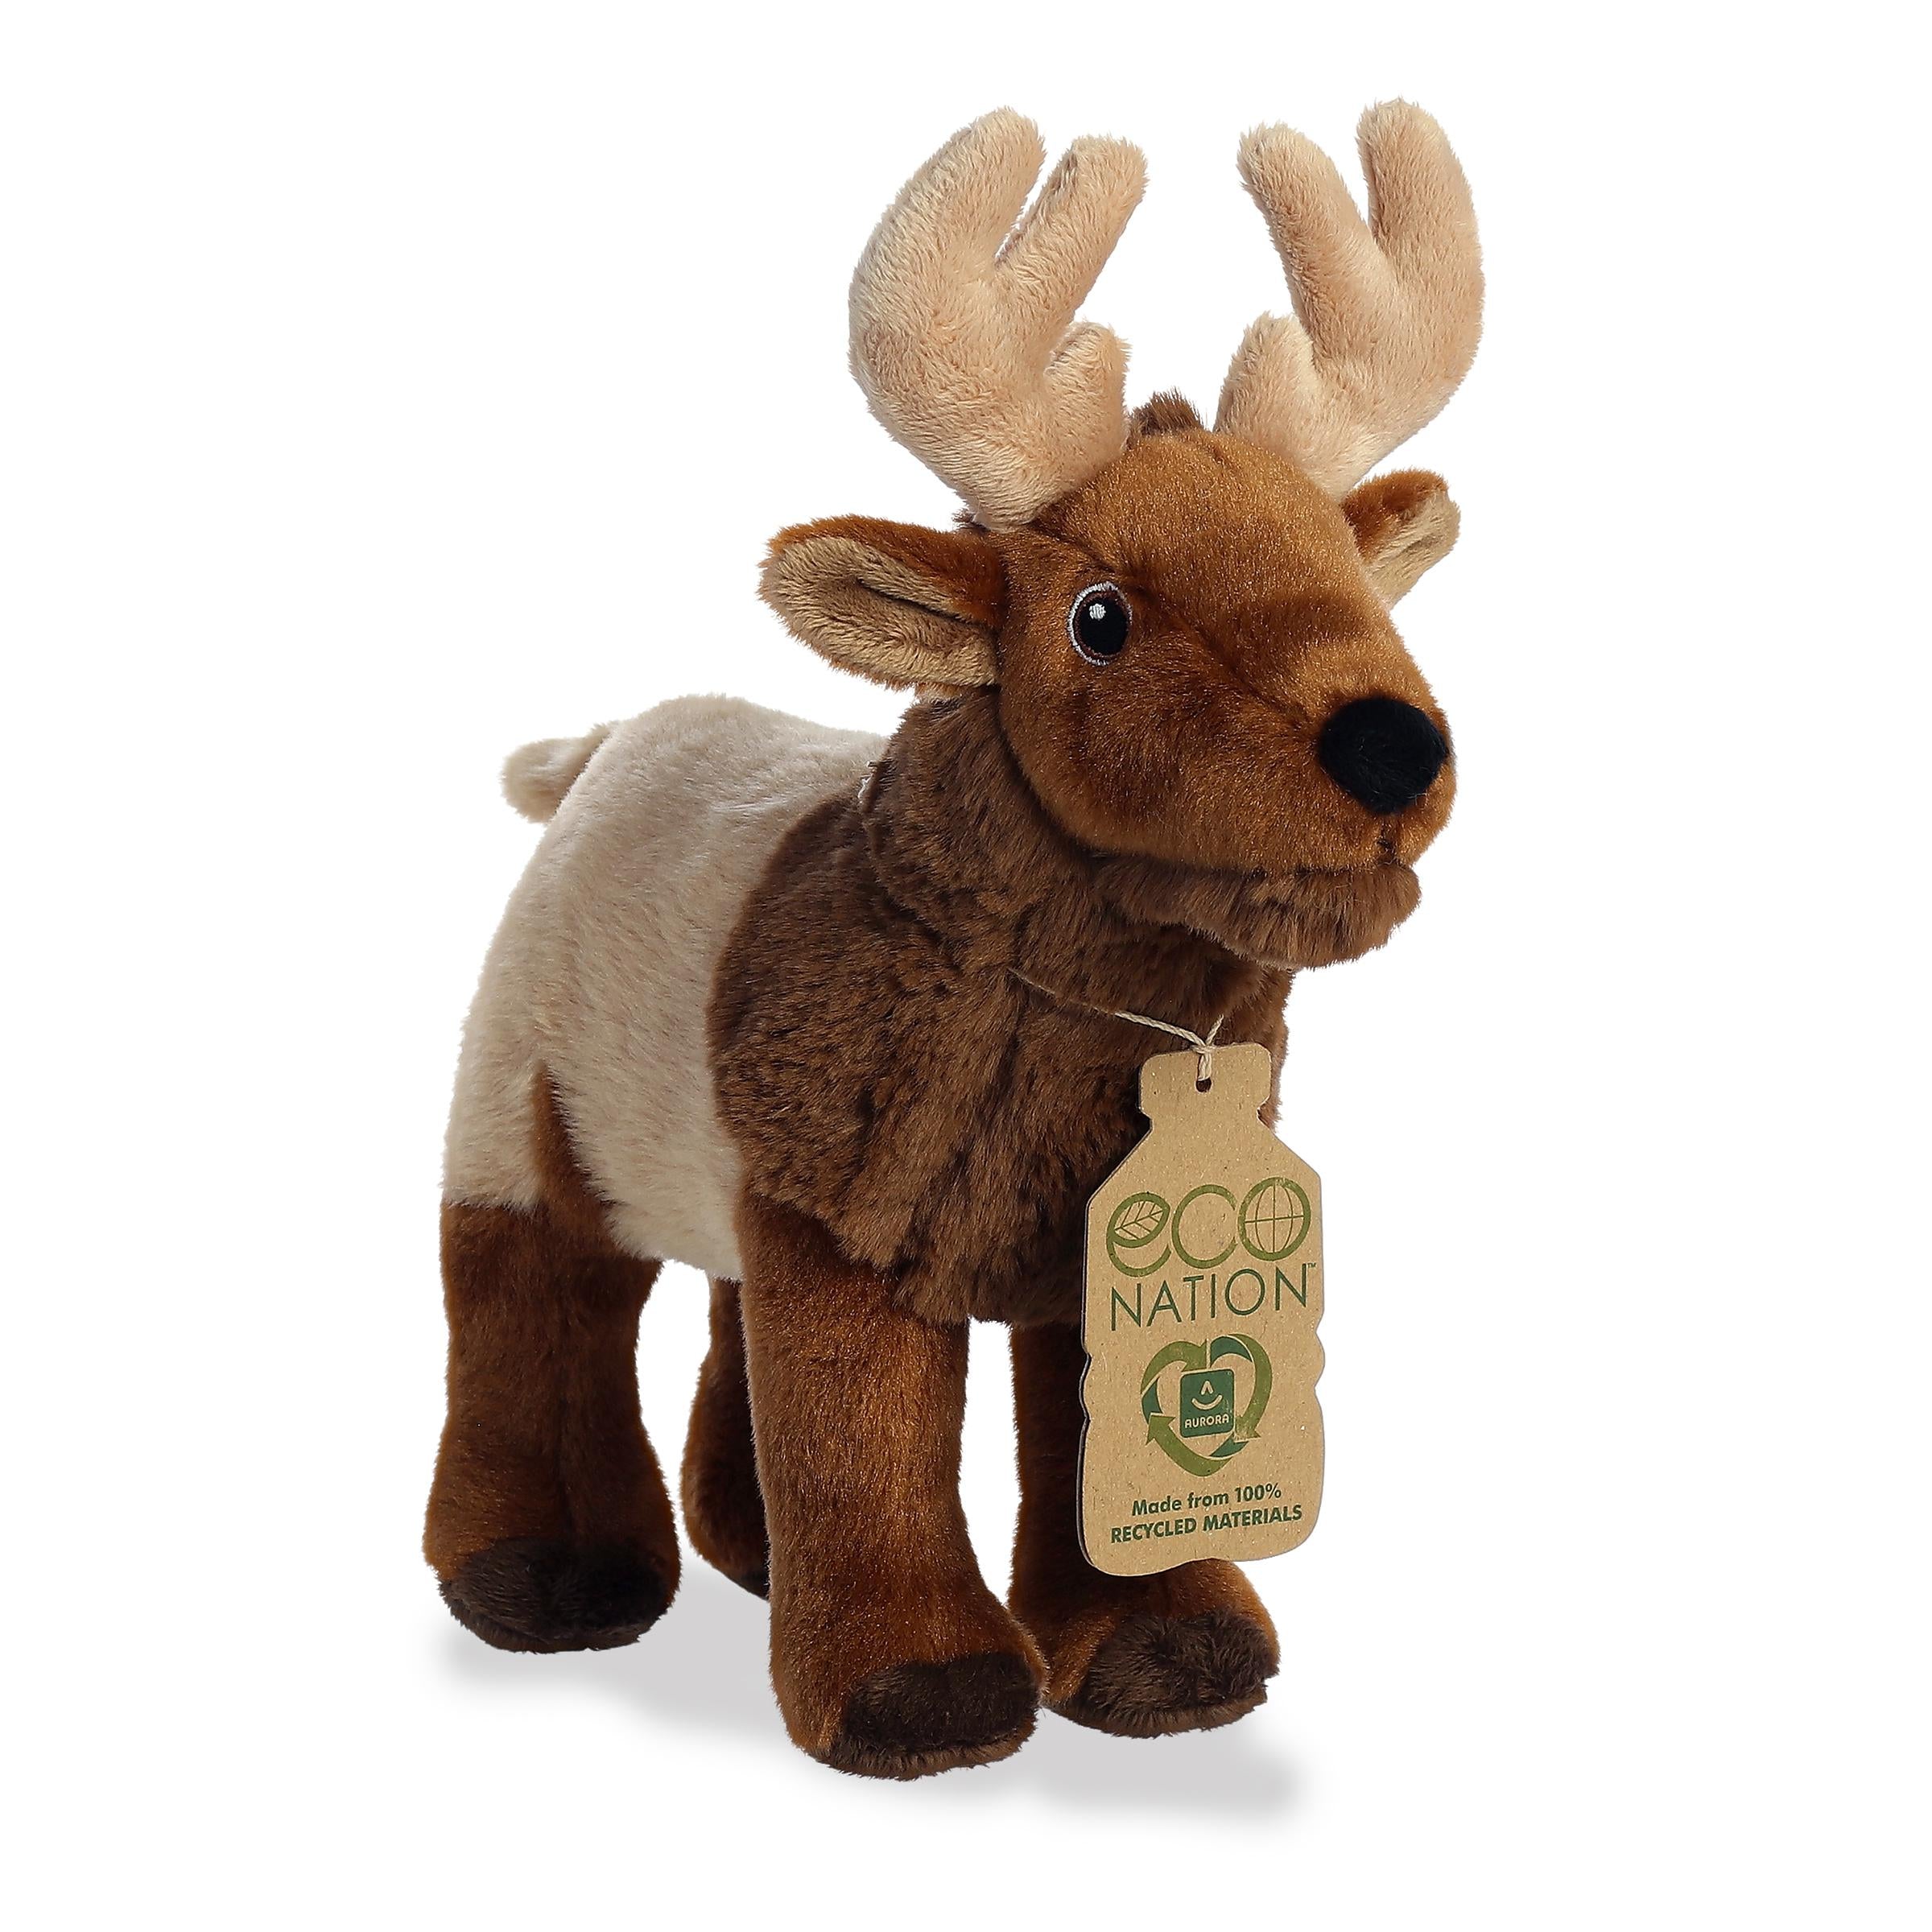 An elk plush that is a blend of tan and brown with large plush antlers, embroidered eyes, and an eco-nation tag